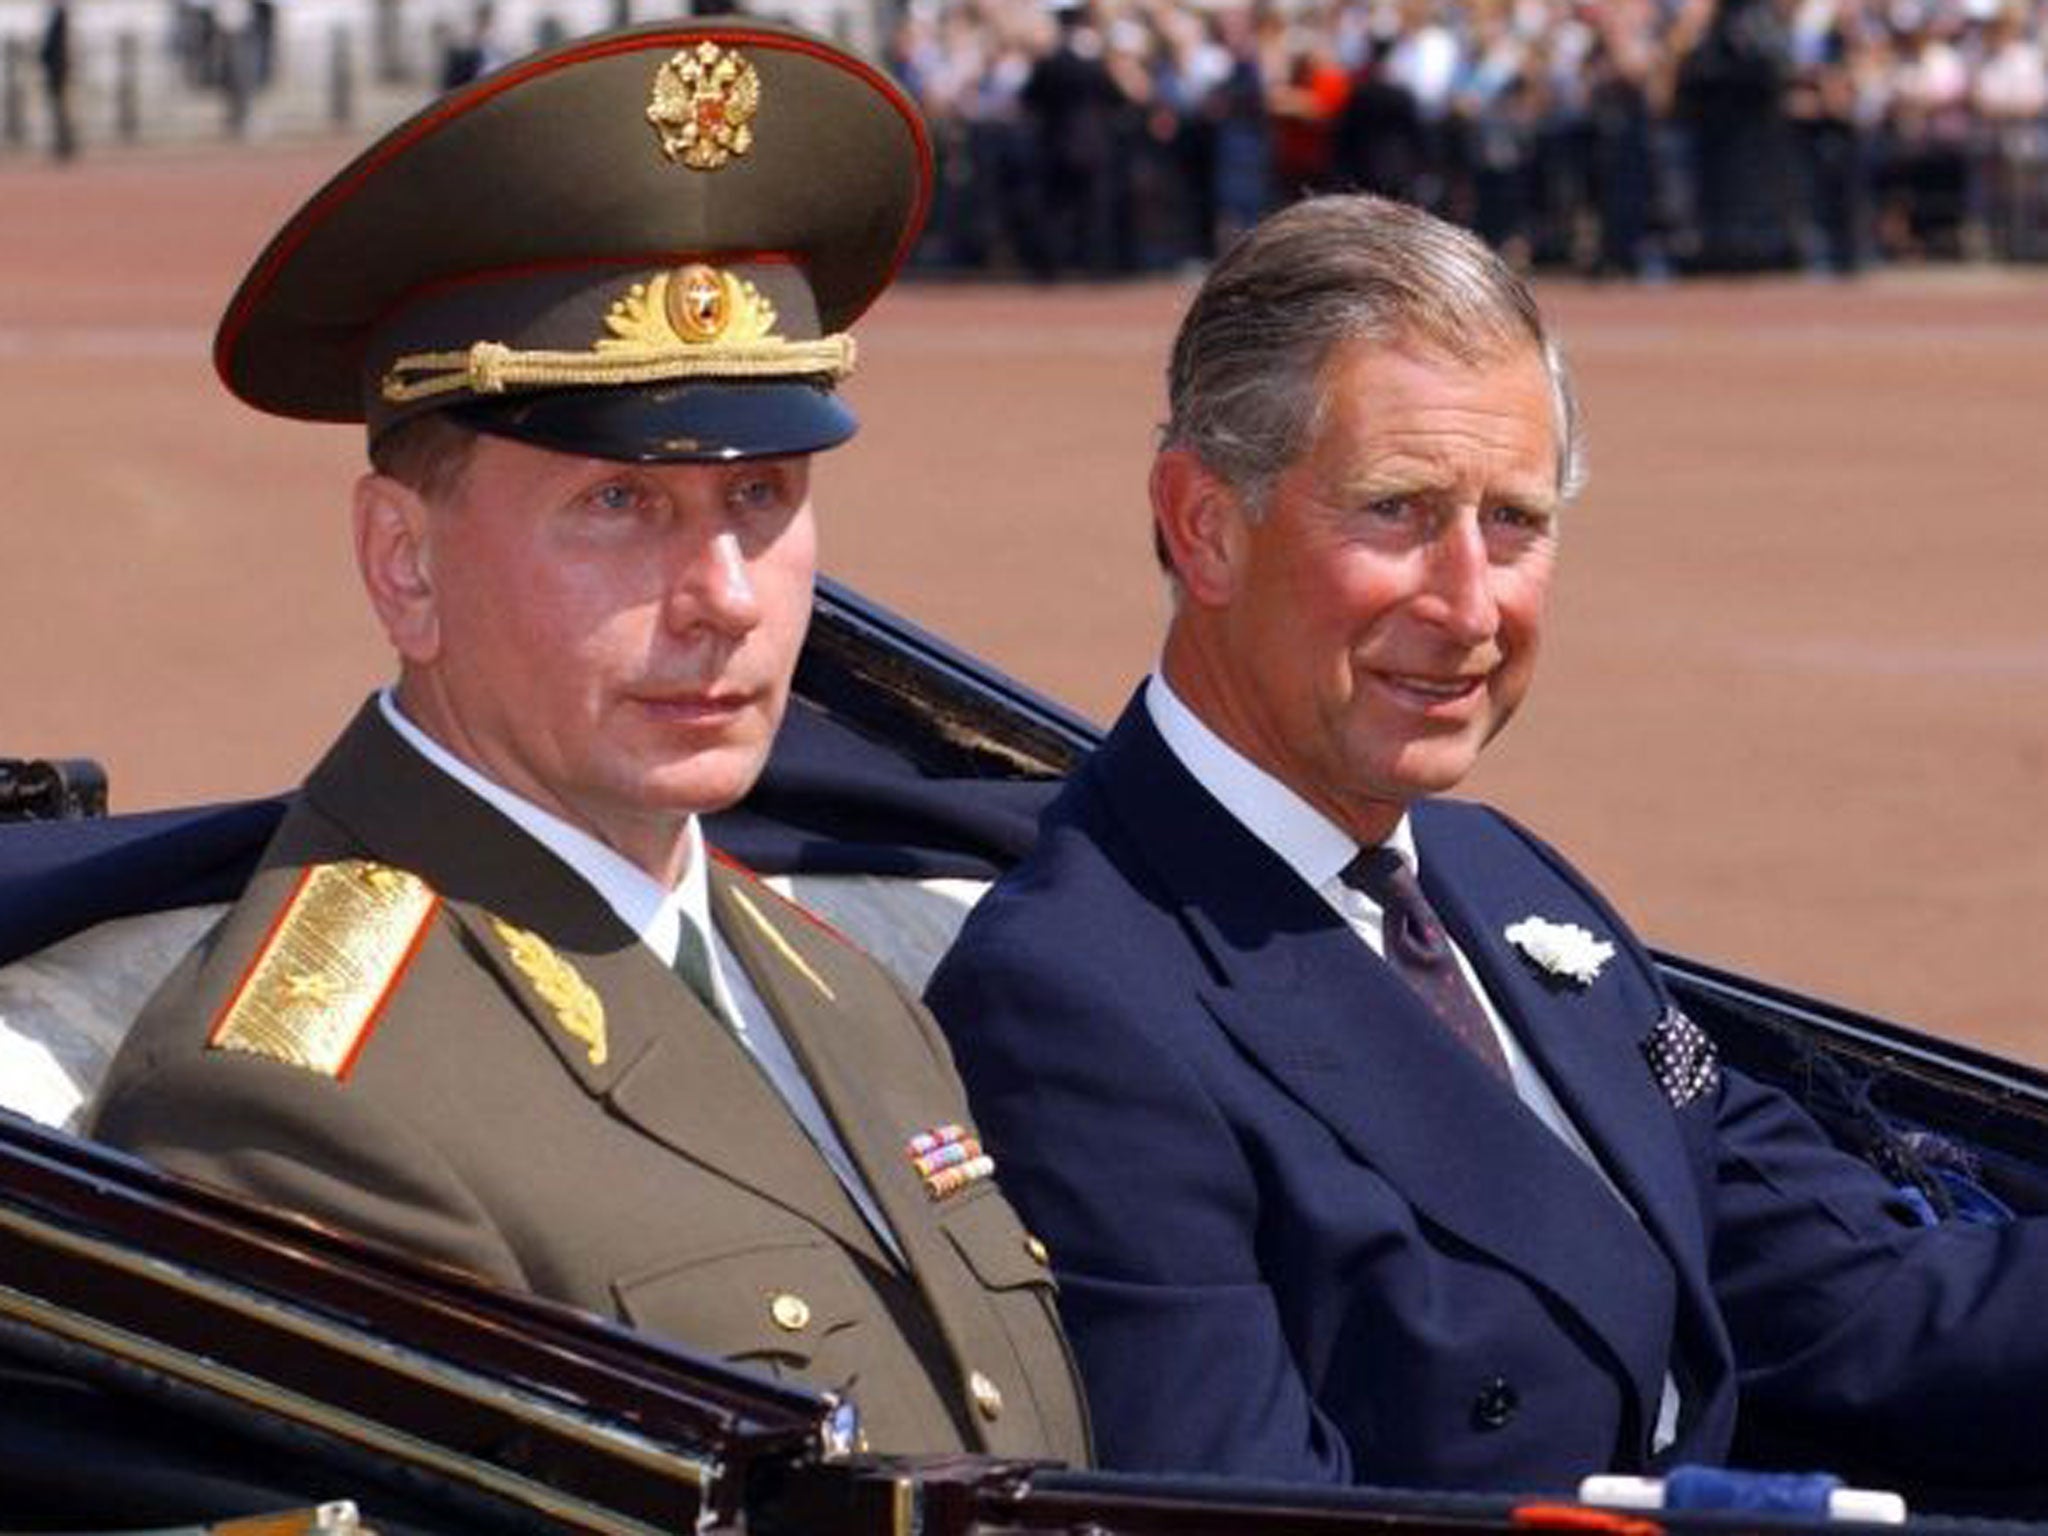 File photo dated 24/06/03 of the Prince of Wales (right) at Buckingham Palace in London with Russian President Vladimir Putin. The Prince of Wales has compared the actions of Russian leader Vladimir Putin to Nazi dictator Adolf Hitler, it has been claimed